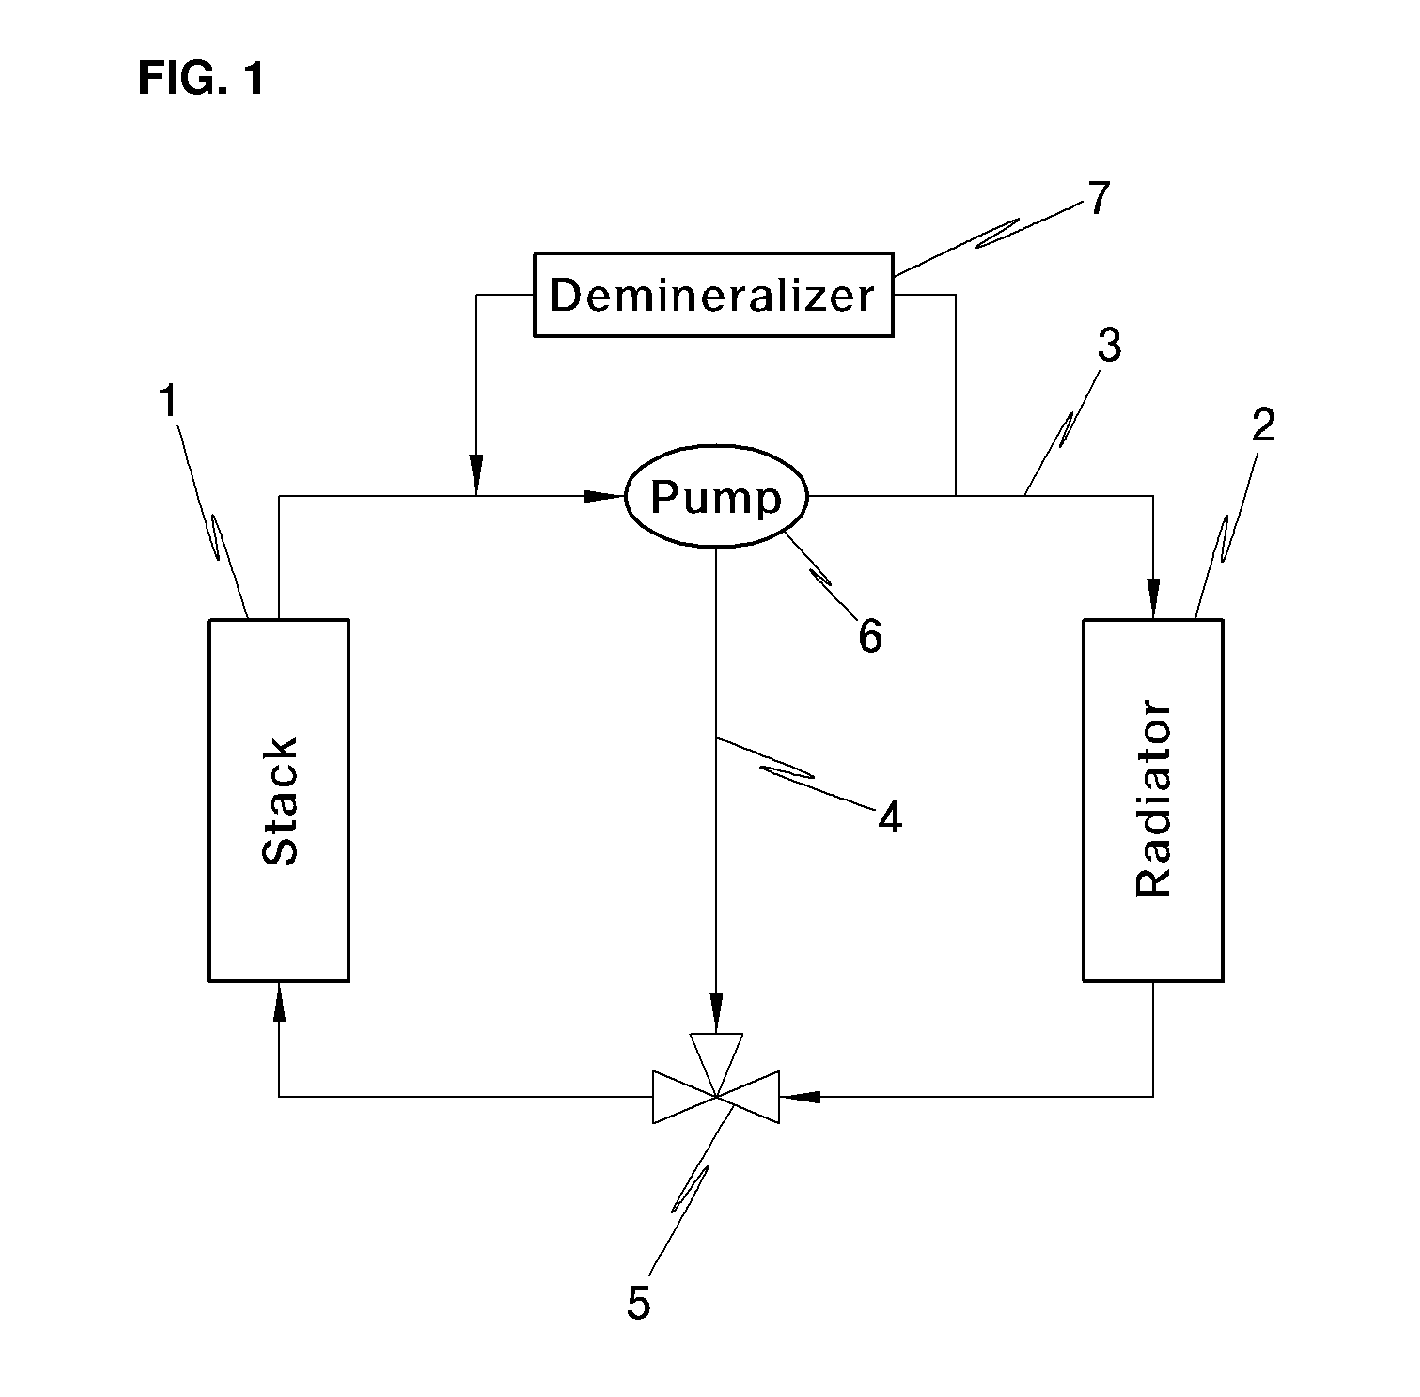 Coolant demineralizer for a fuel cell vehicle